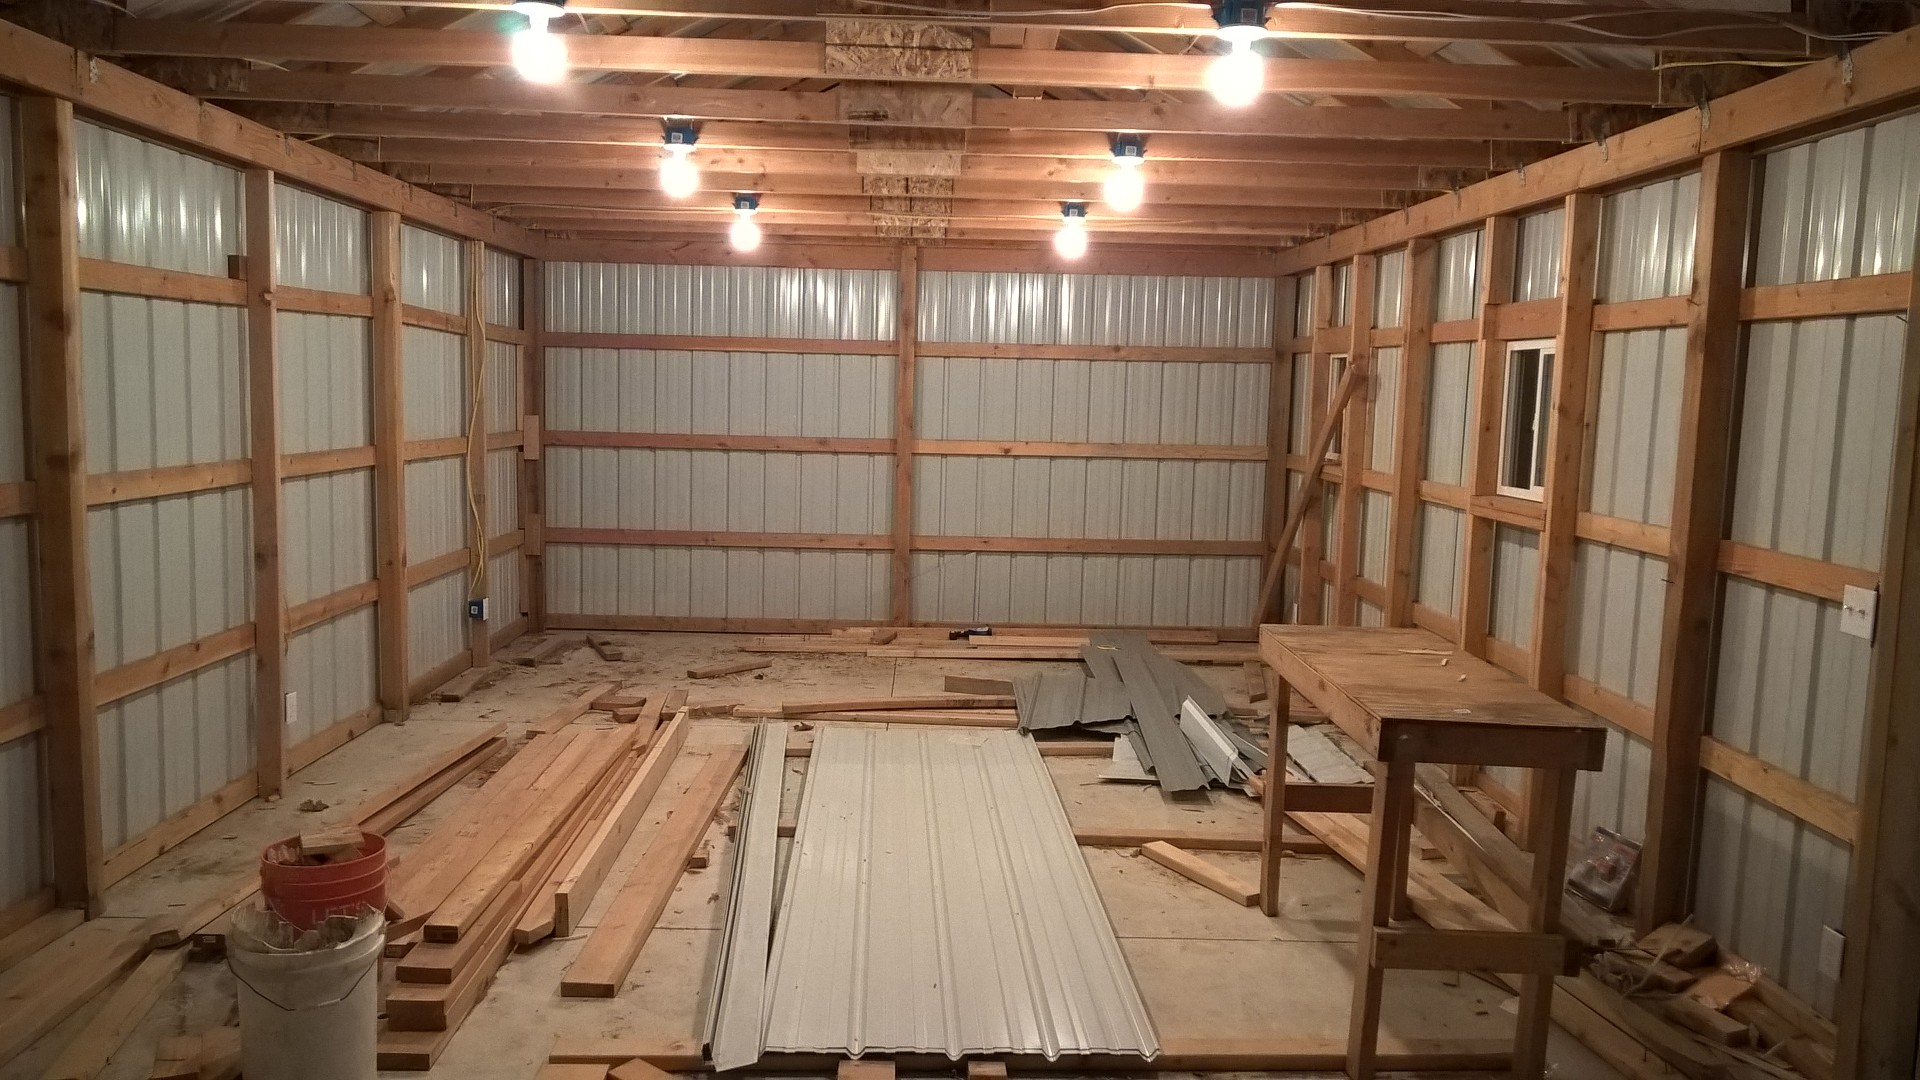 Building A Pole Barn Shed From Scratch P4 – Planning Pole ...